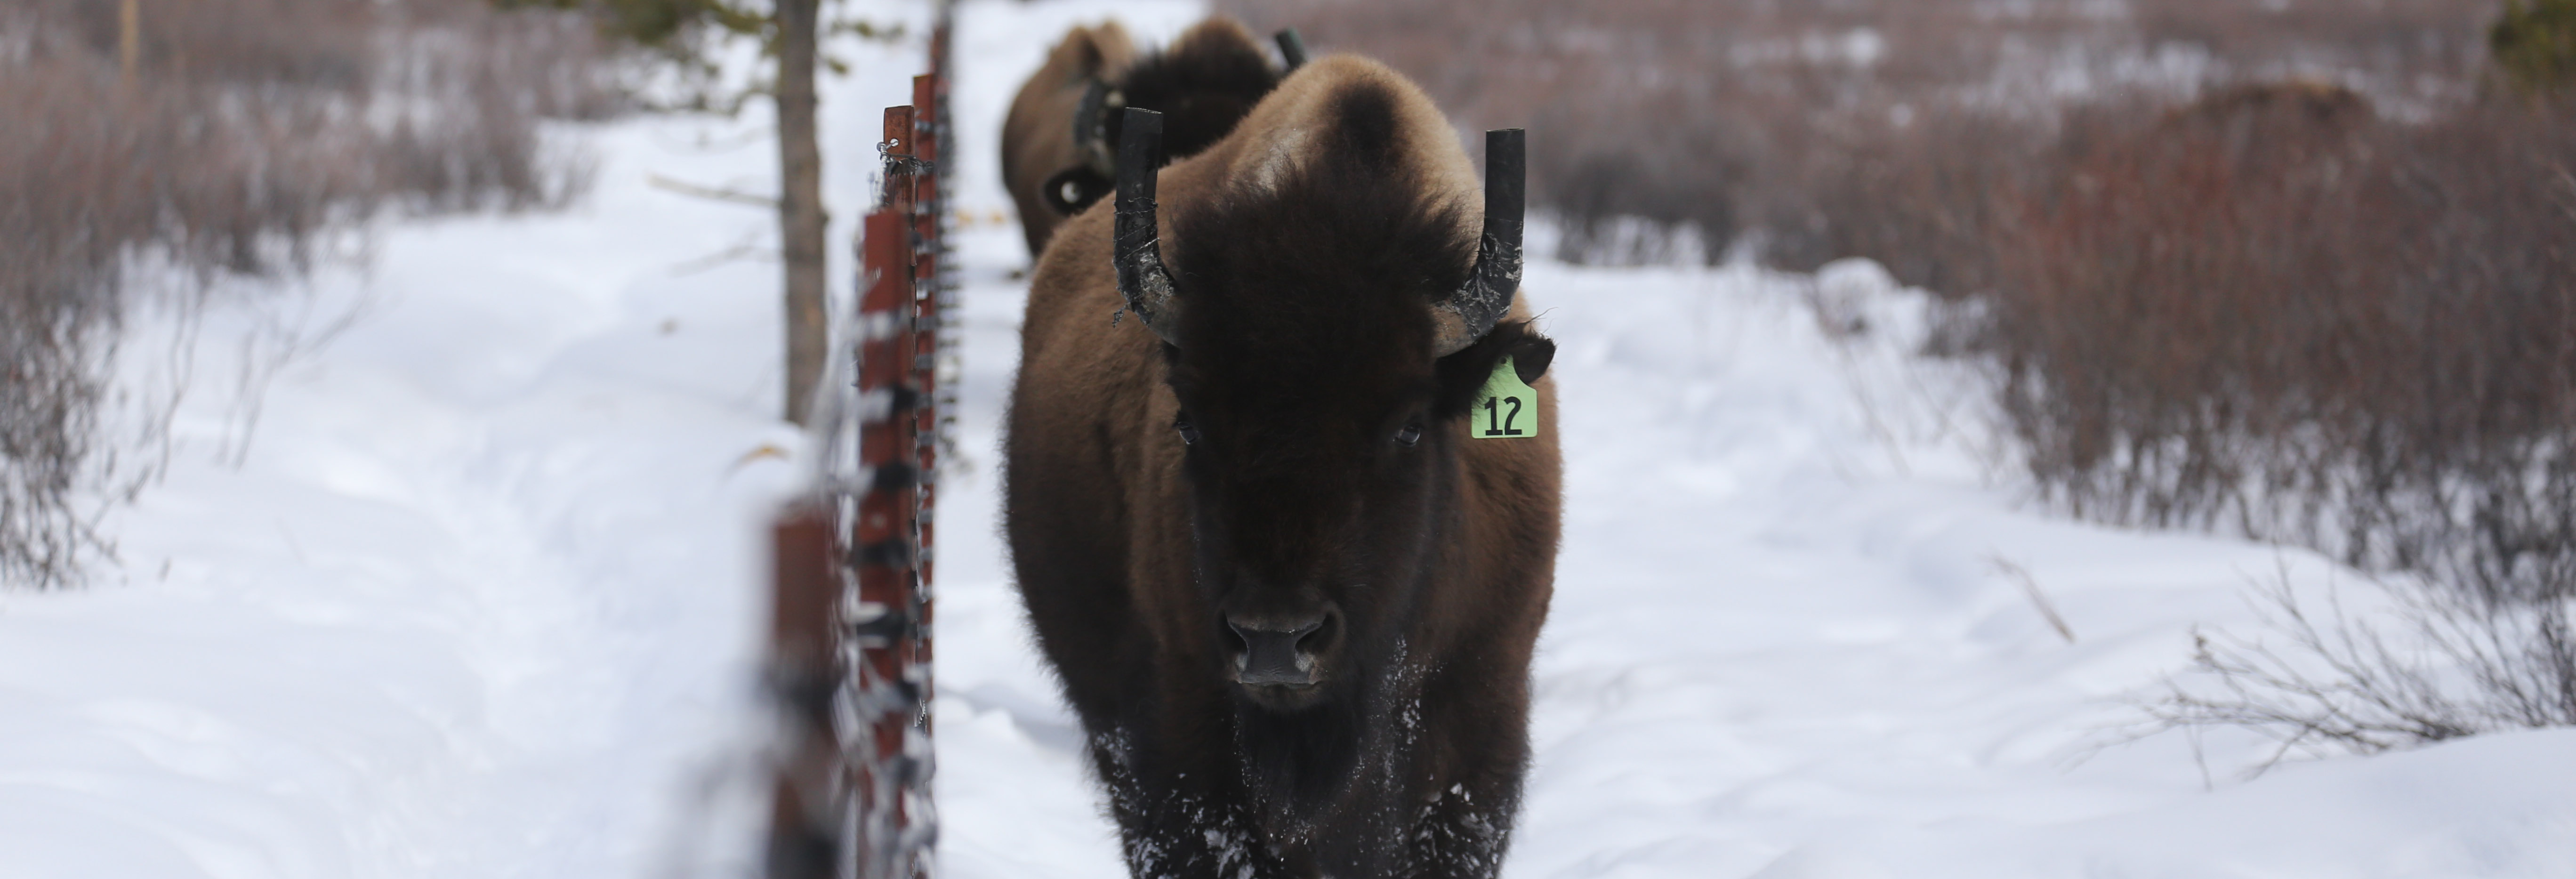 Bison walk along fence in snow.